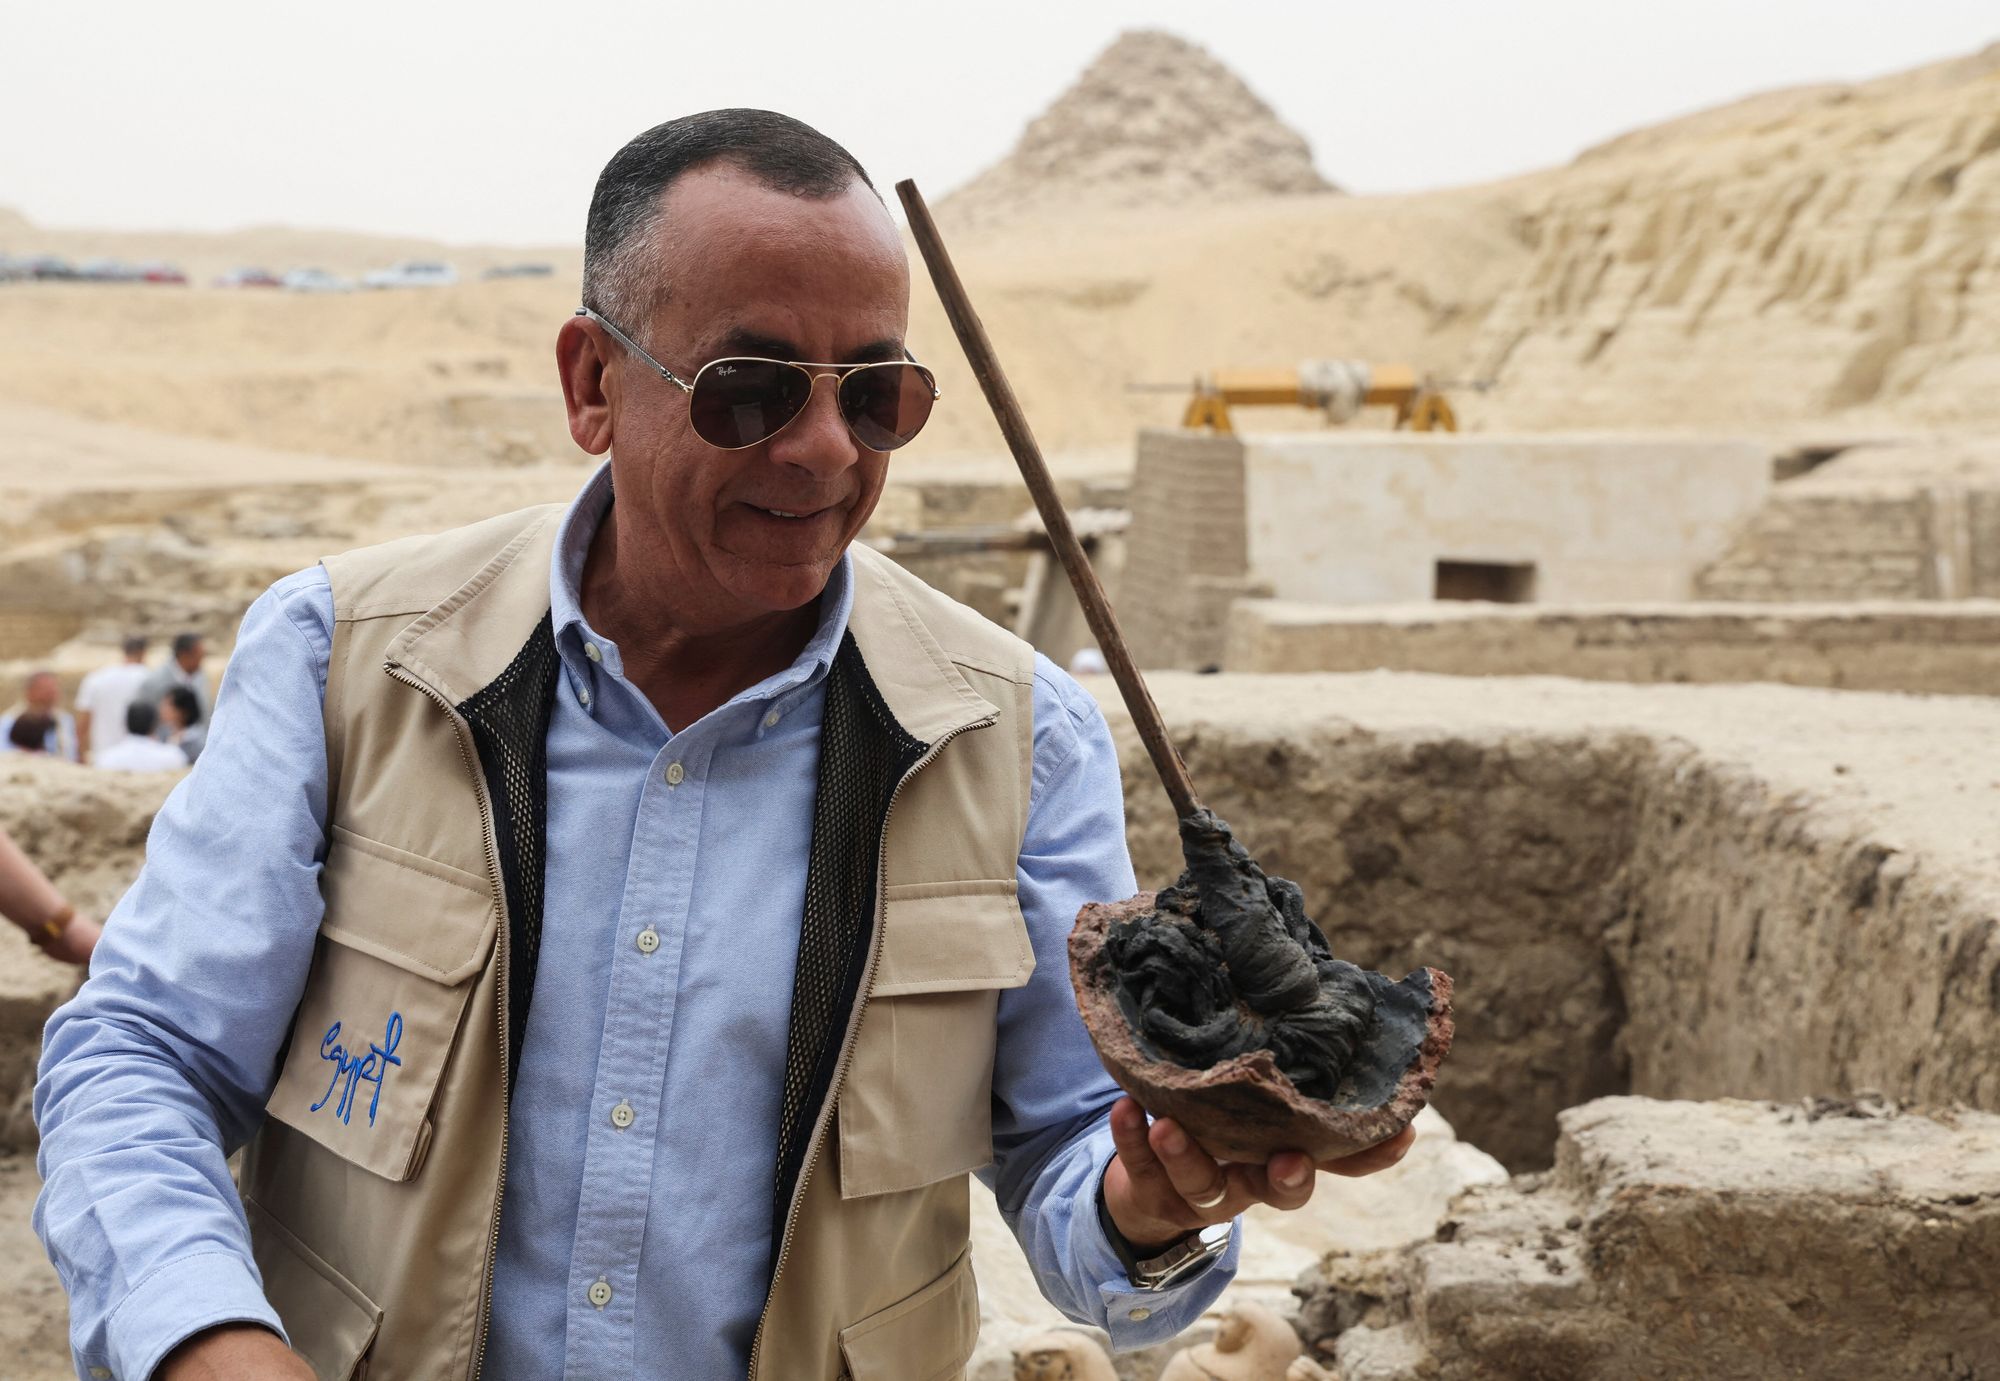 Egypt mummification workshops and tombs discovered 